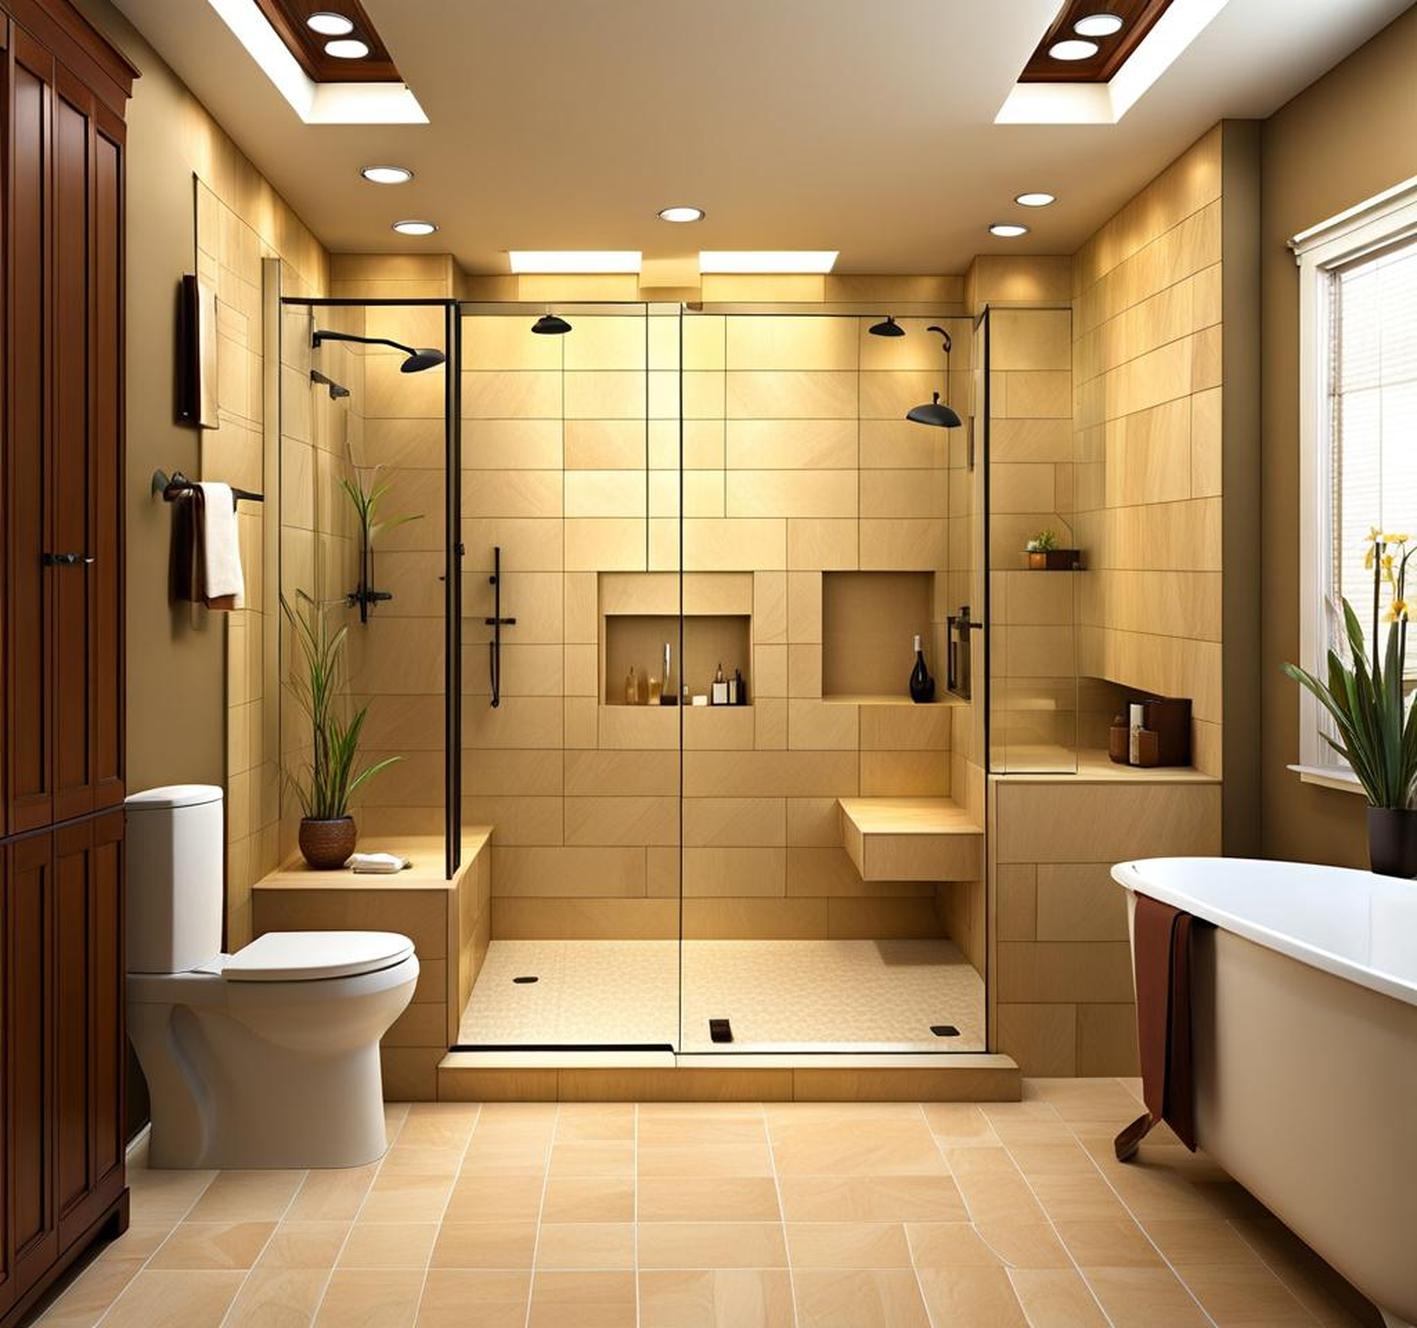 5x9 bathroom layout with shower